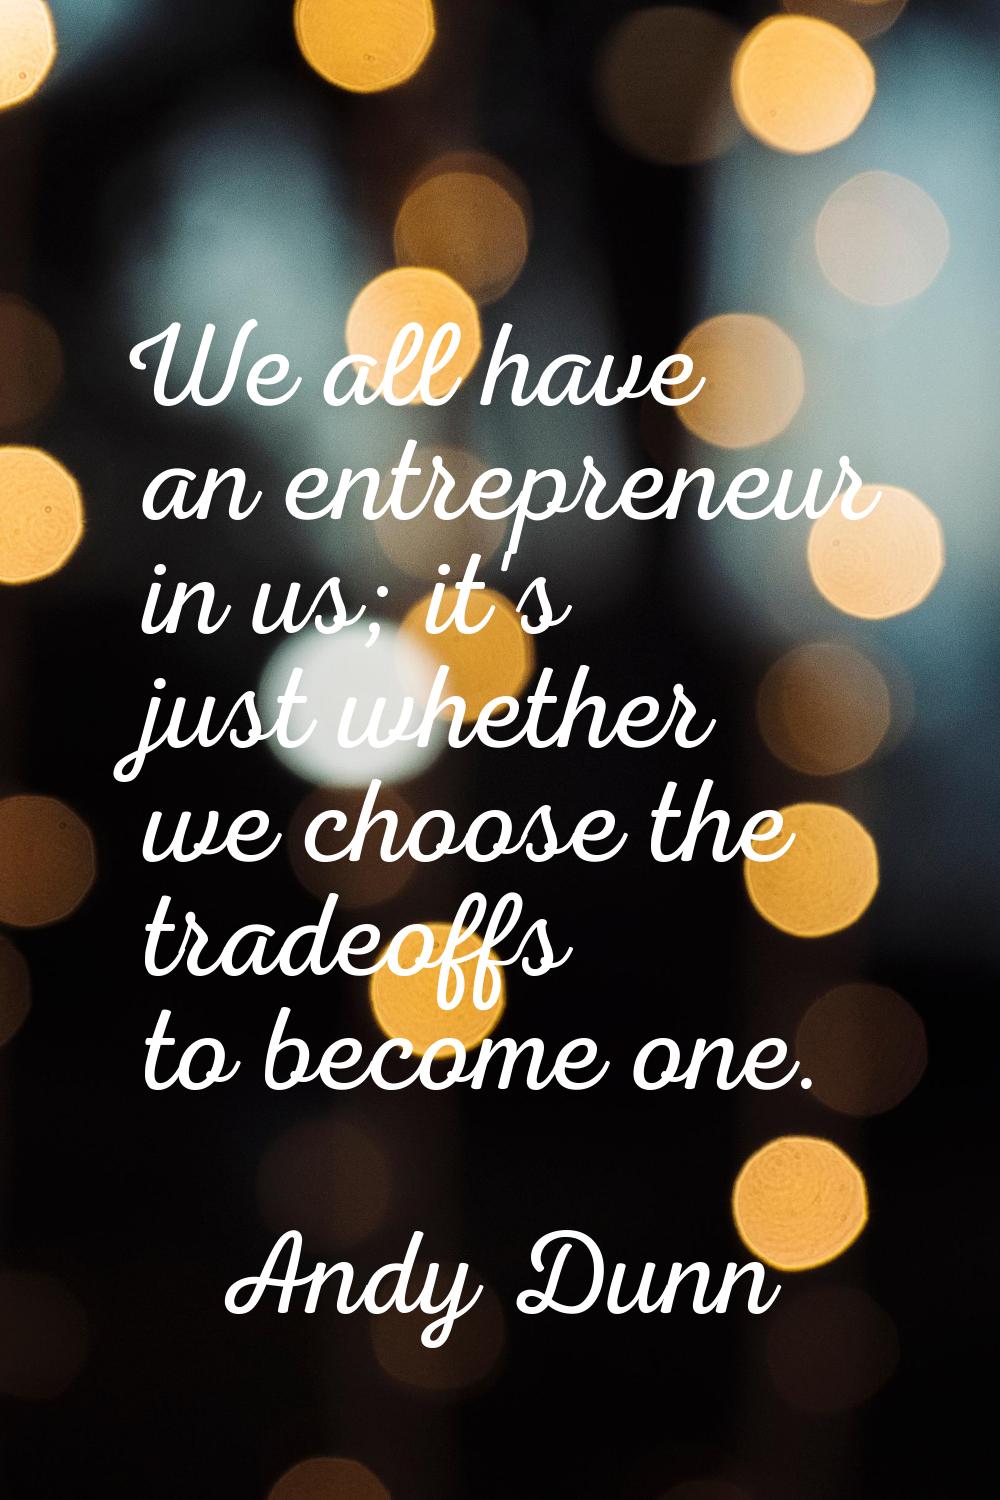 We all have an entrepreneur in us; it's just whether we choose the tradeoffs to become one.